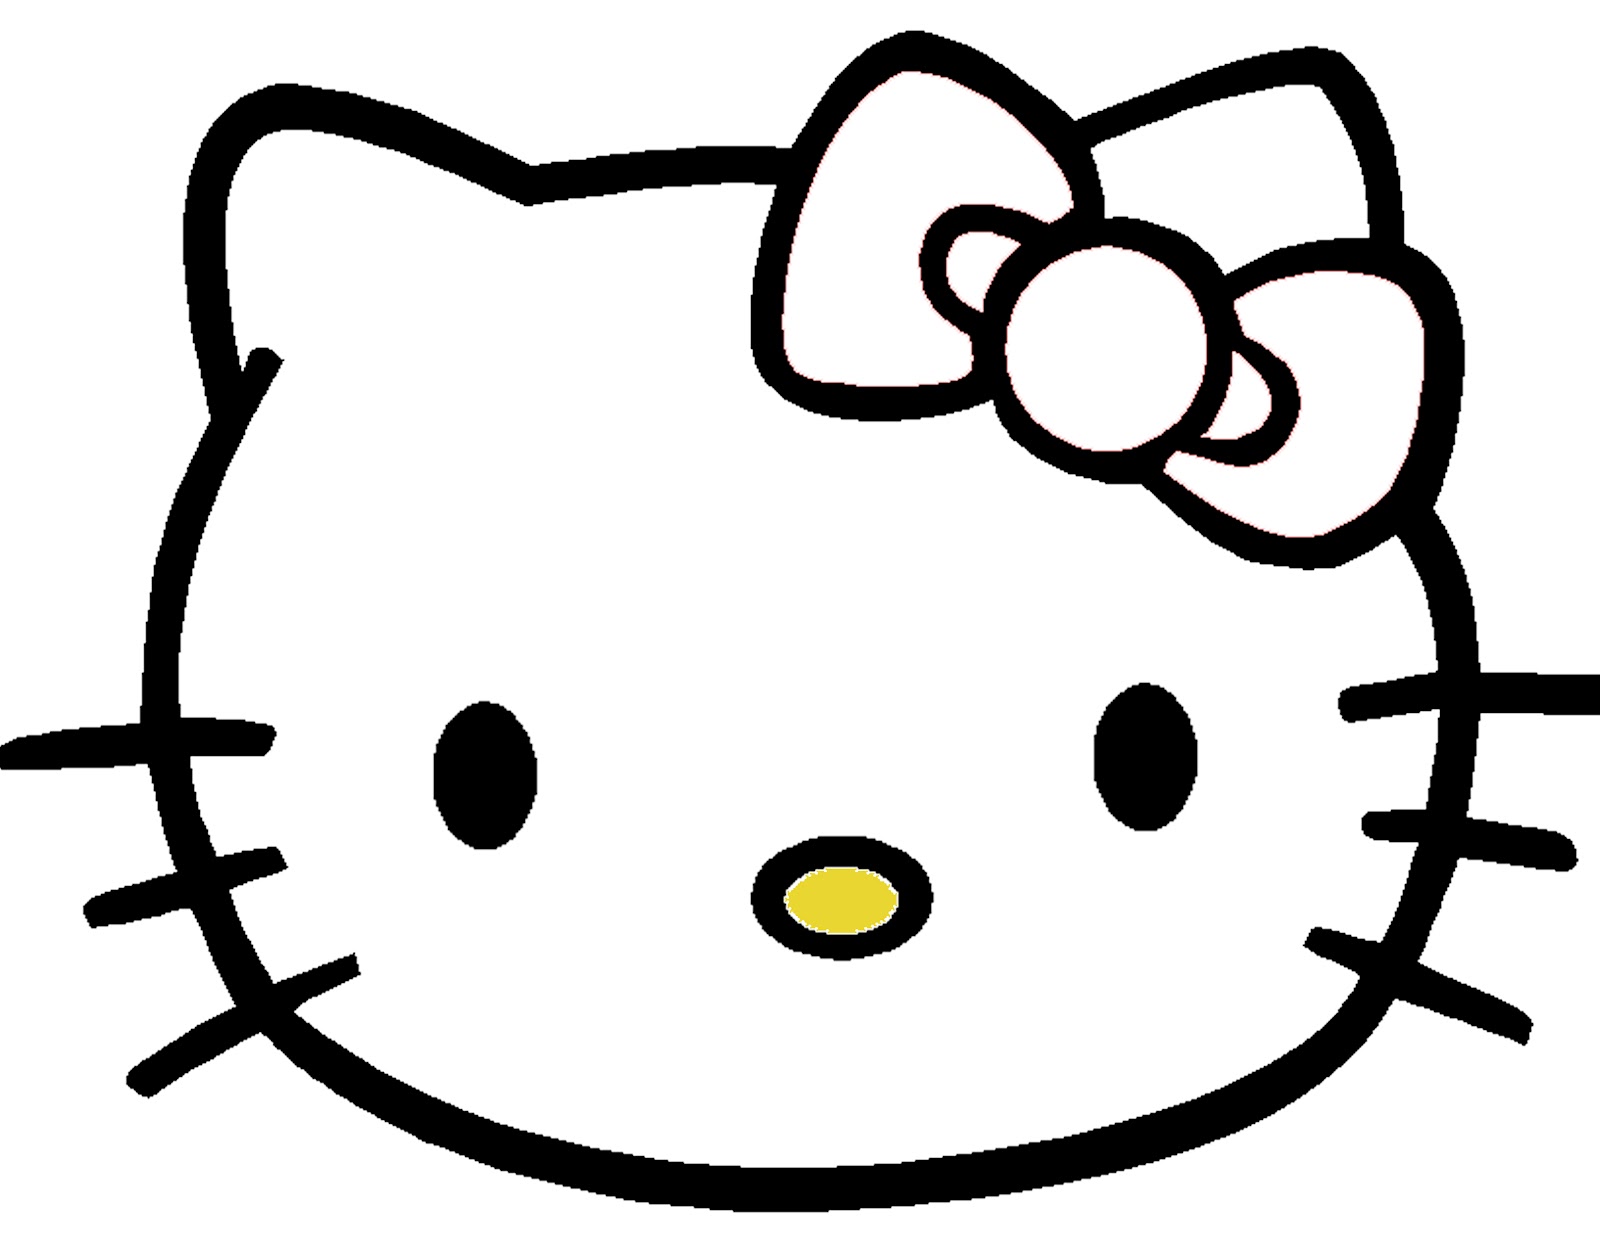 6-best-images-of-hello-kitty-stencil-printable-hello-kitty-pumpkin-stencil-hello-kitty